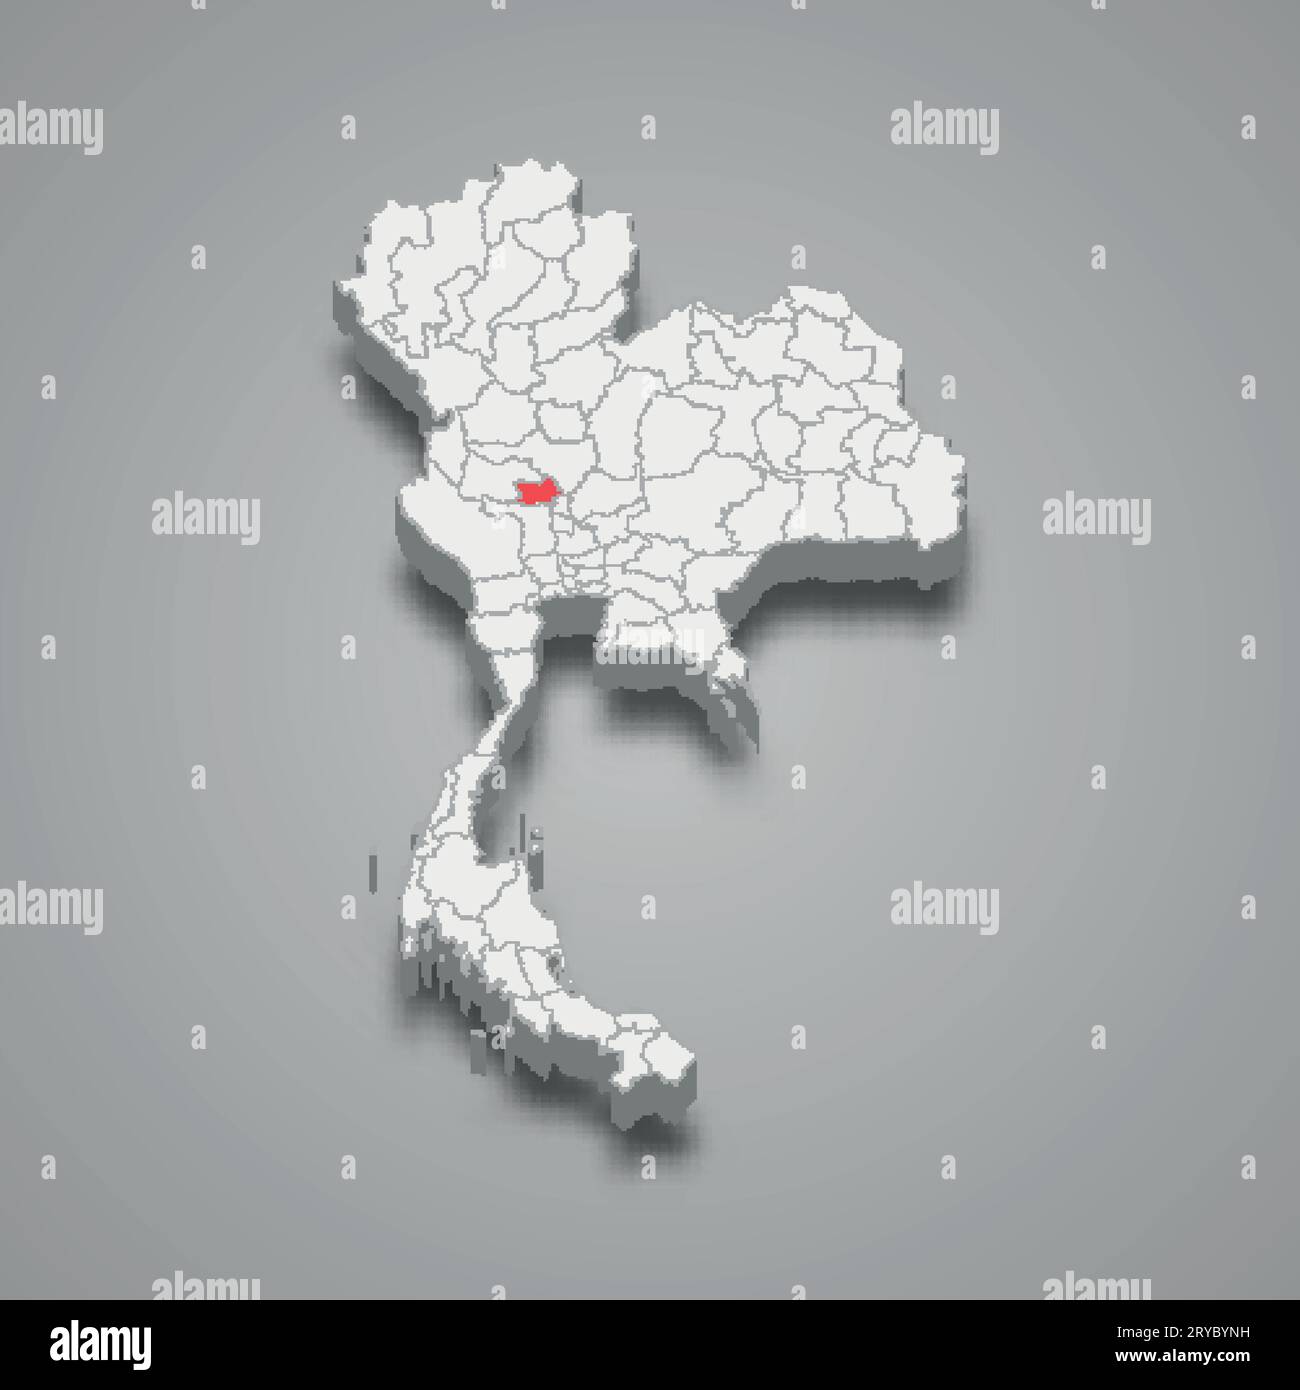 Chai Nat province location Thailand 3d isometric map Stock Vector